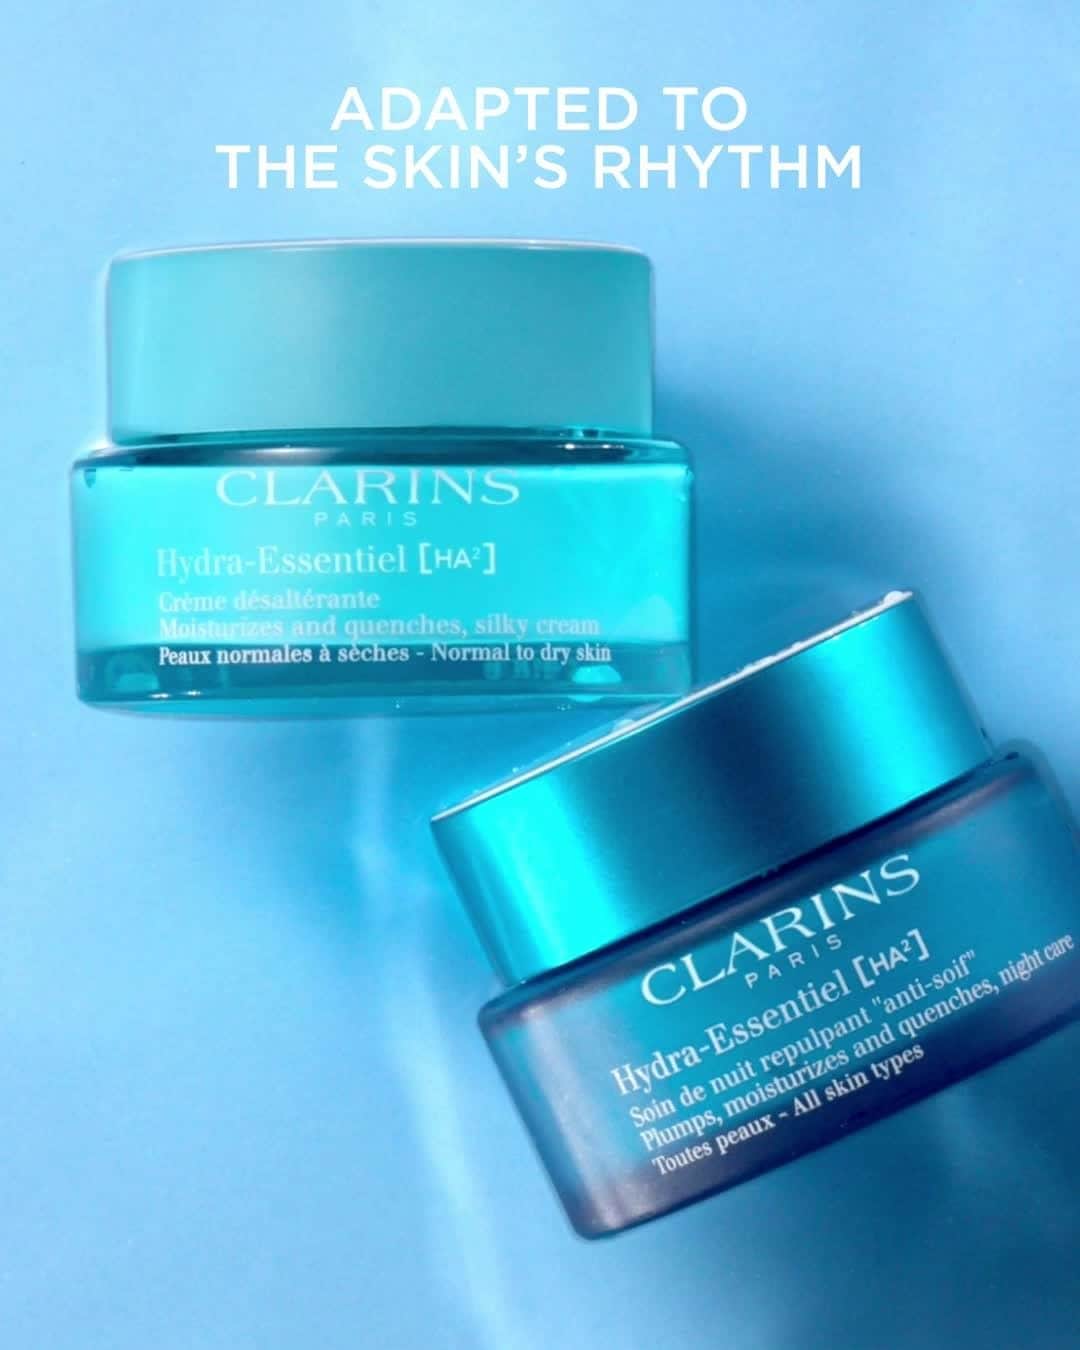 Clarins Australiaのインスタグラム：「Today is #HydrationDay! Here are our top tips for keeping your body and skin hydrated during the dry, cold winter months:⁣ ⁣ 🌊 Drink at least 2L of water every day⁣ 🌊 Use a rich moisturiser at night⁣ 🌊 Don’t take showers that are overly hot - it can dry out your skin!⁣ ⁣ #Clarins #Hydration #Skincare」